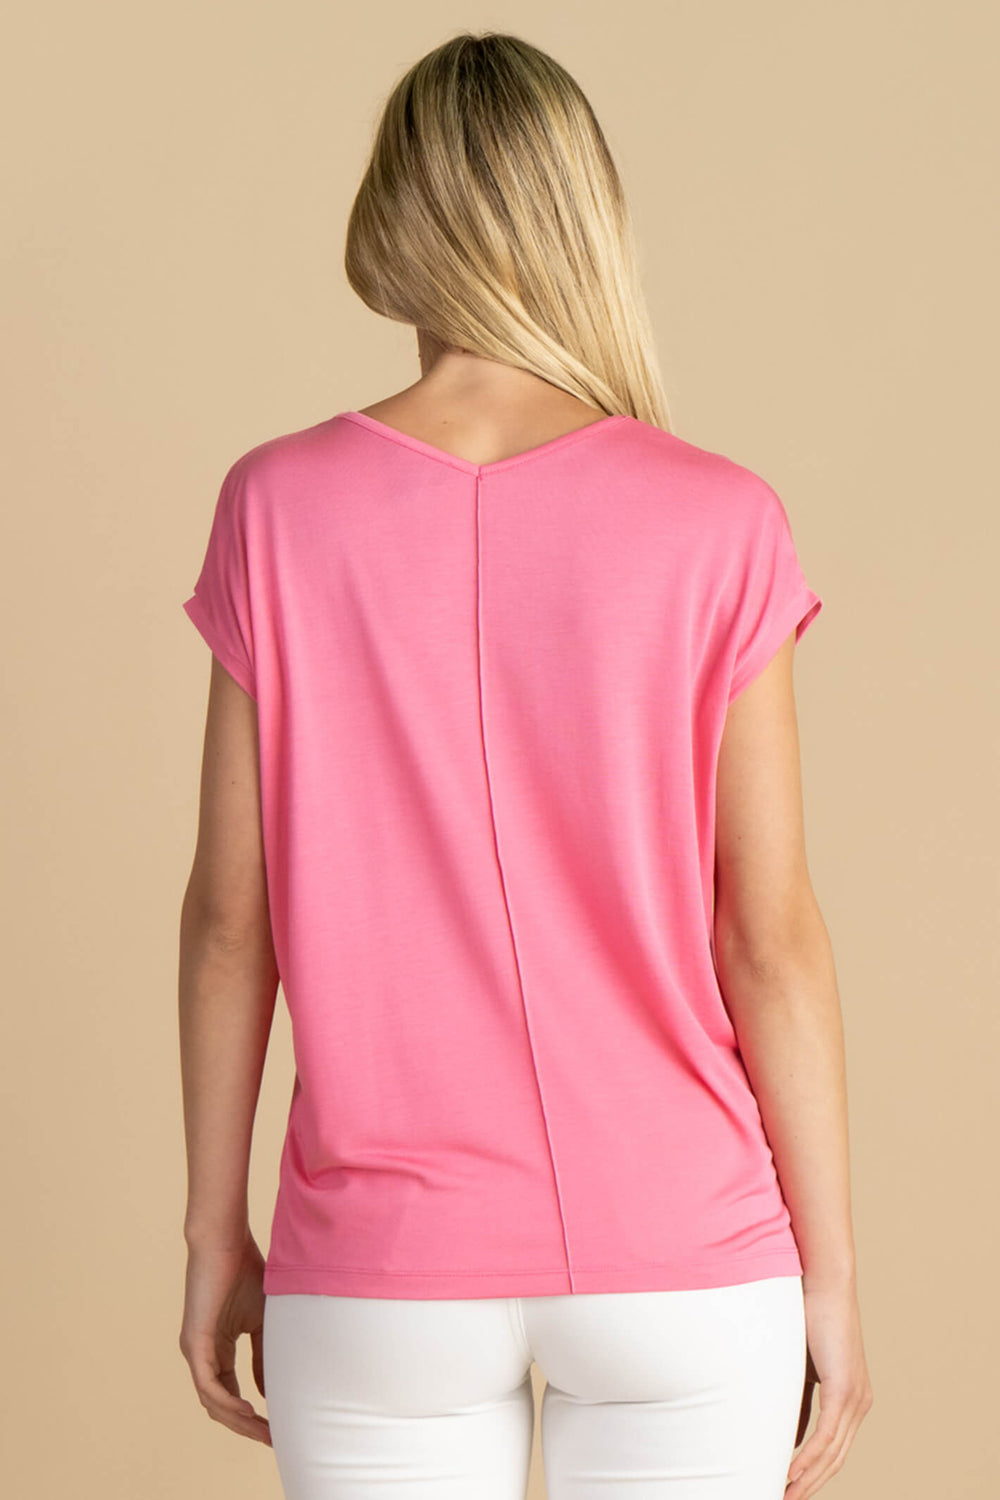 Marble Fashions 6965 194 Pink Ruched Shoulder V-Neck Top - Experience Boutique